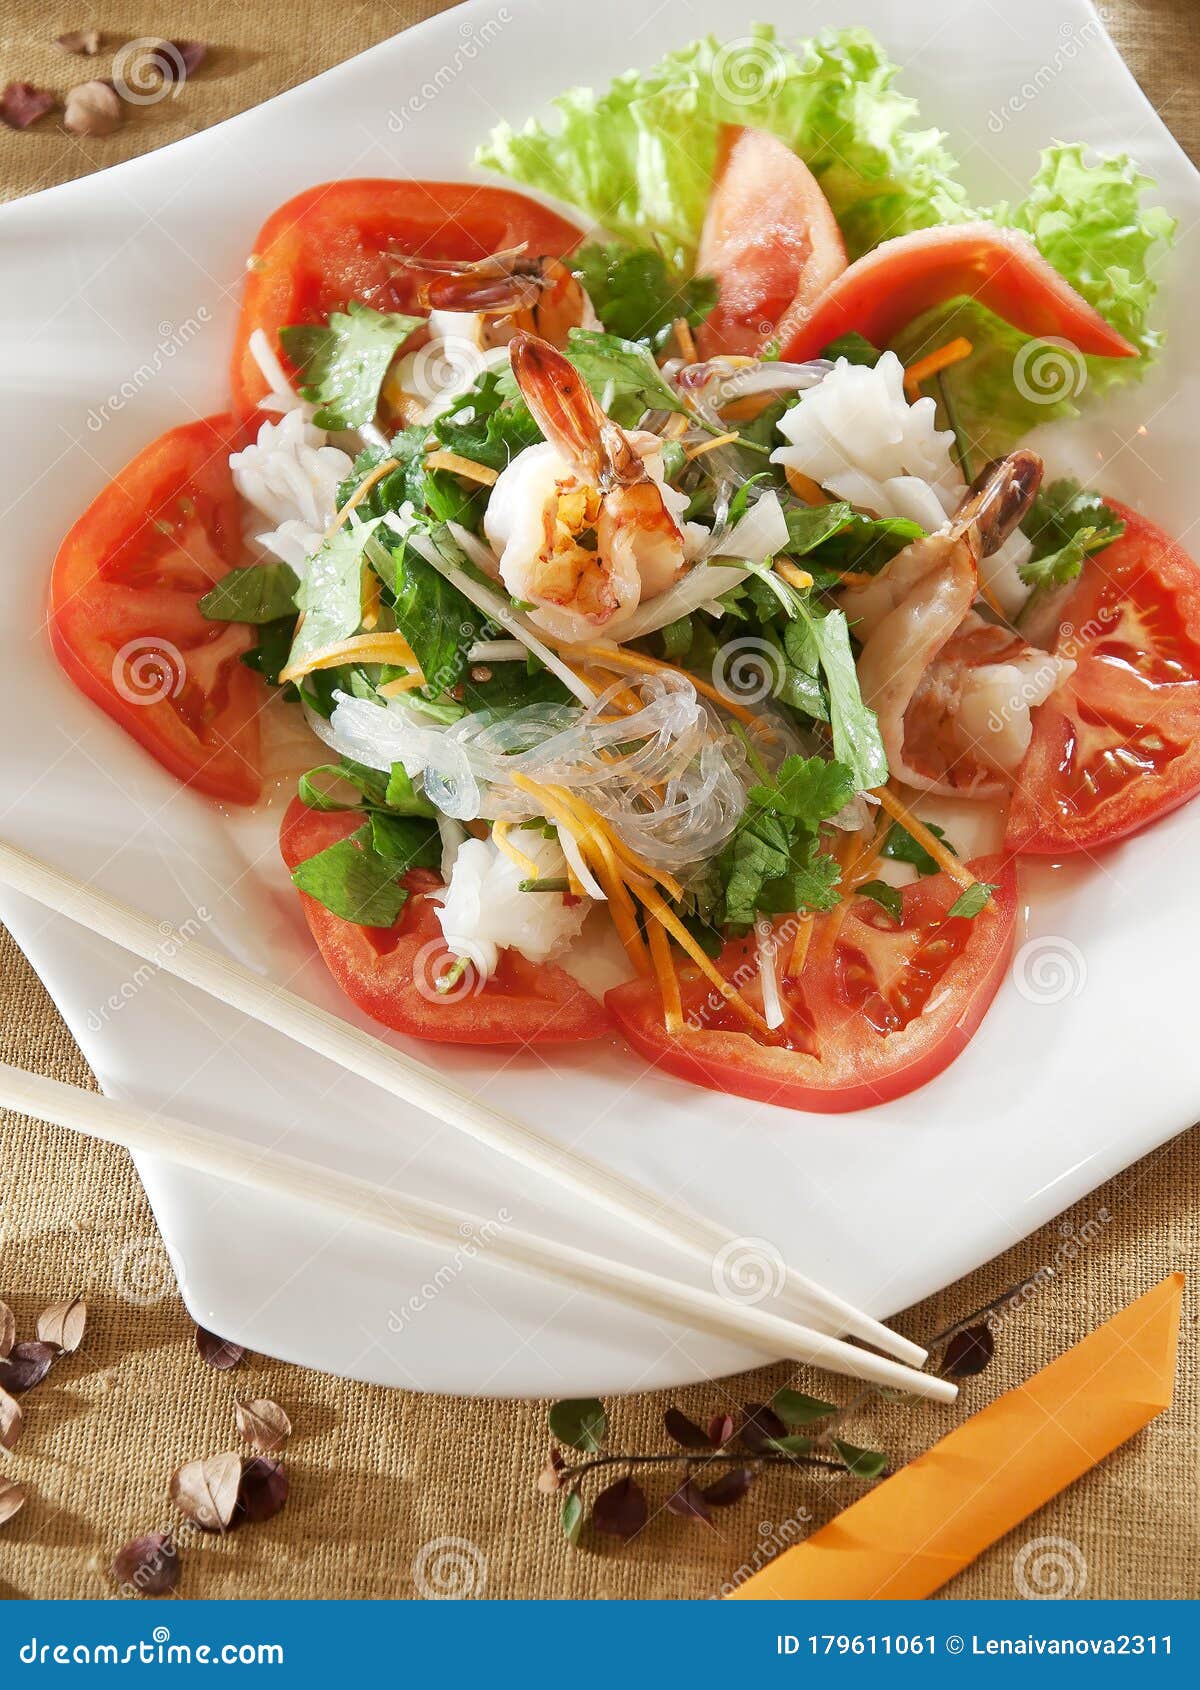 Spicy Seafood Salad in Thai Style Stock Image - Image of balsam, carrot ...